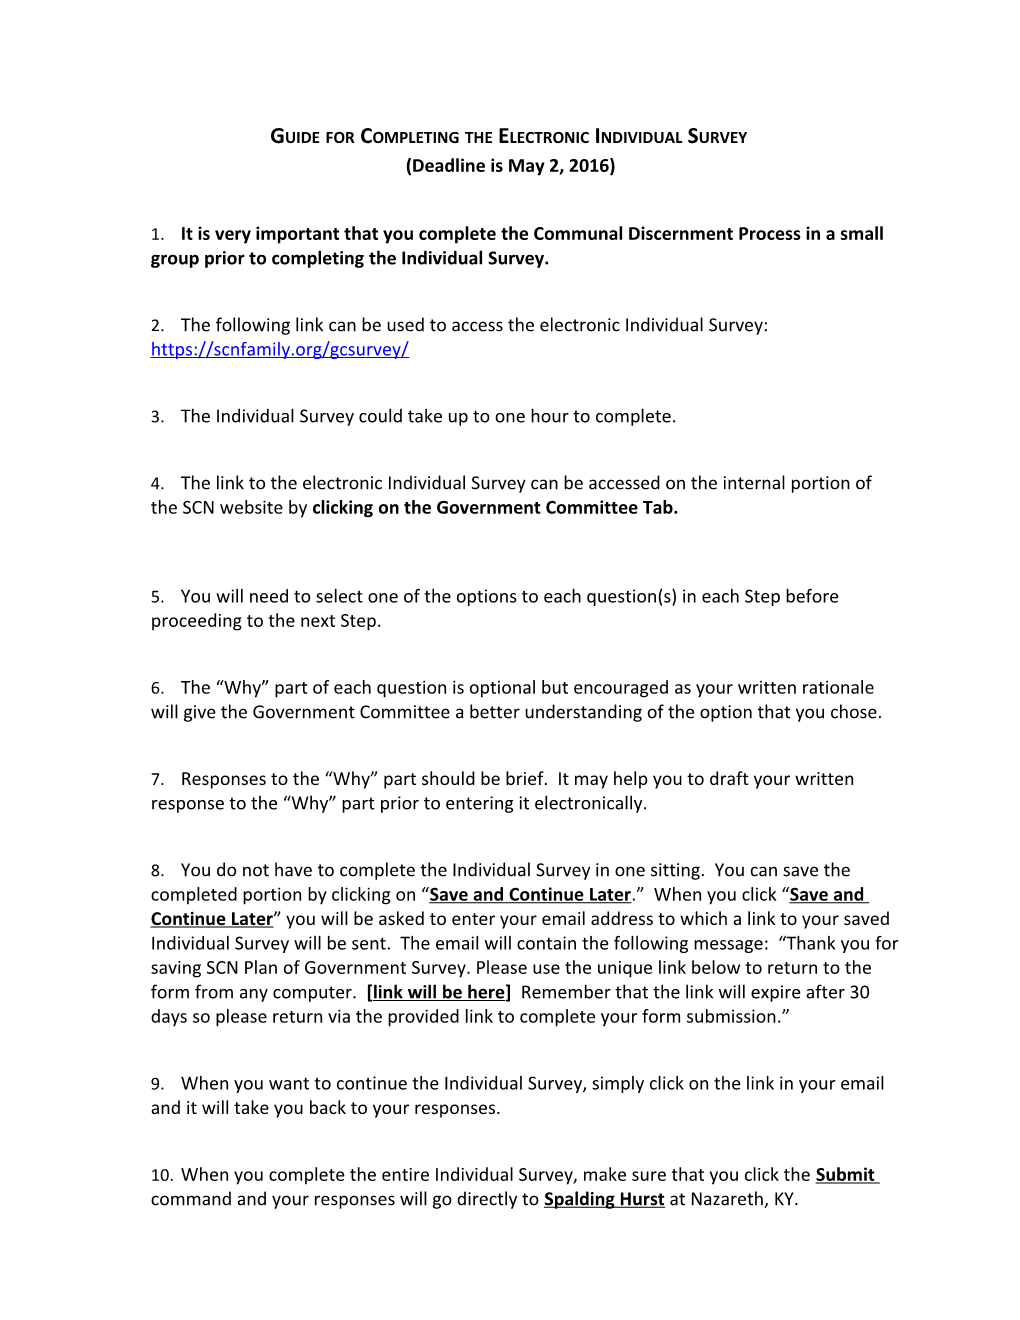 Guide for Completing the Electronic Individual Survey (Deadline Is May 2, 2016)